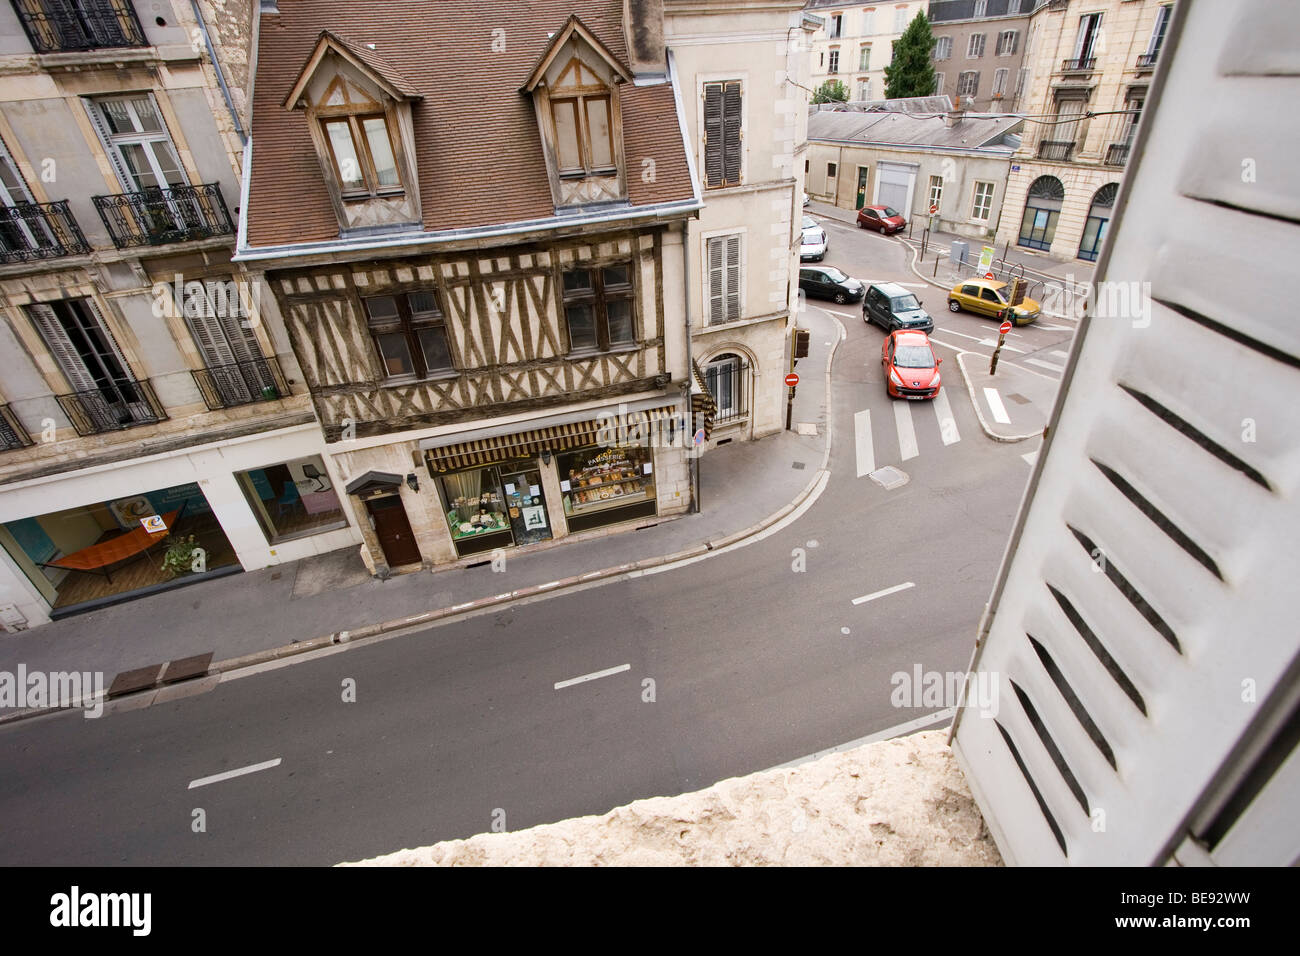 view from window, Rue Chabot Charny, Dijon, France Stock Photo - Alamy